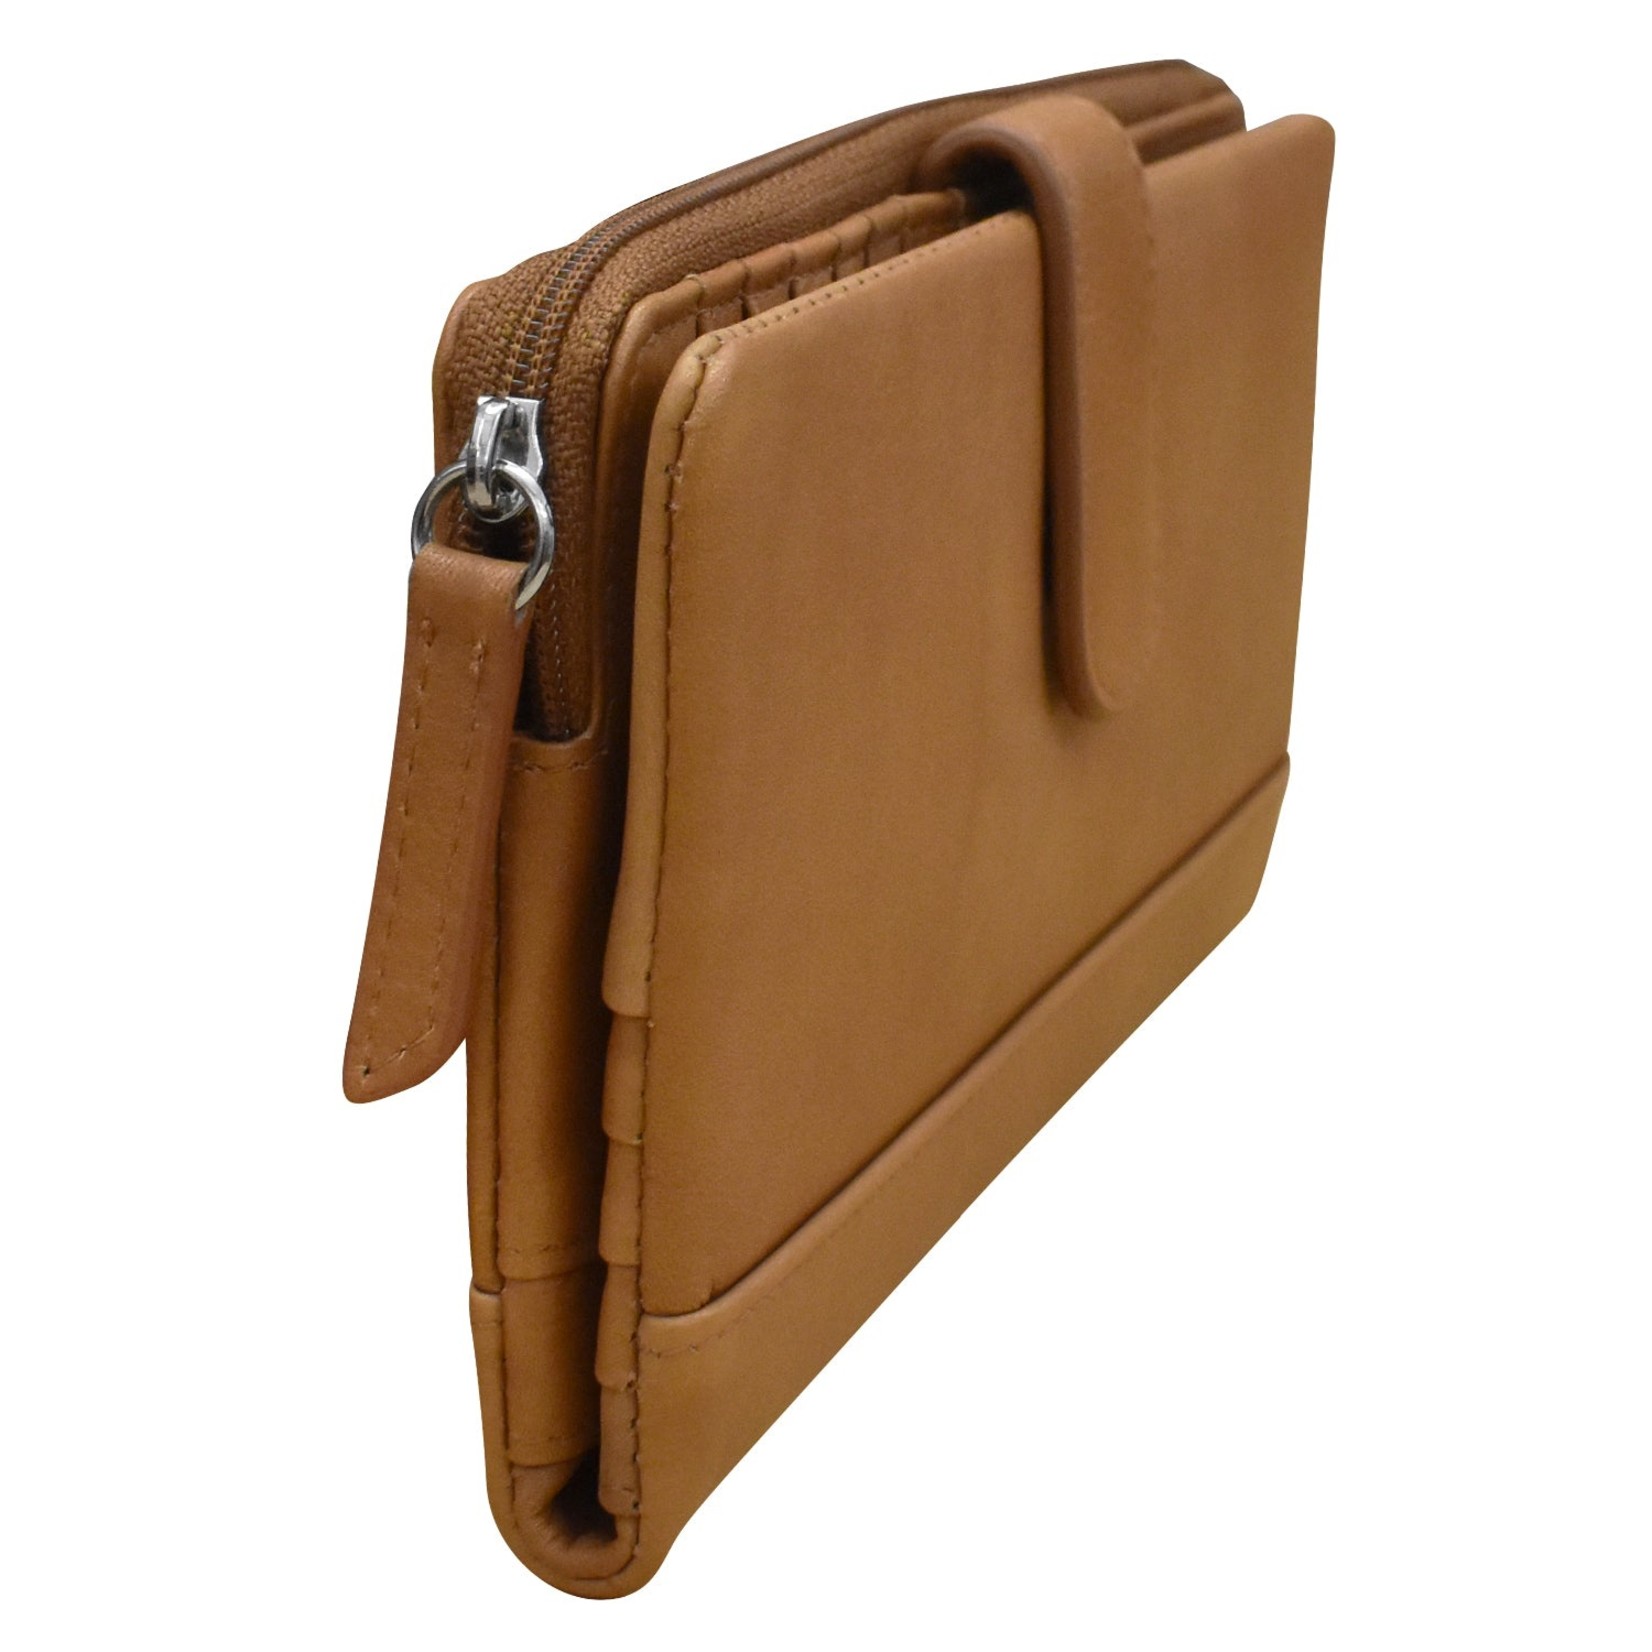 Leather Handbags and Accessories 7420 Antique Saddle - RFID Smartphone Wallet